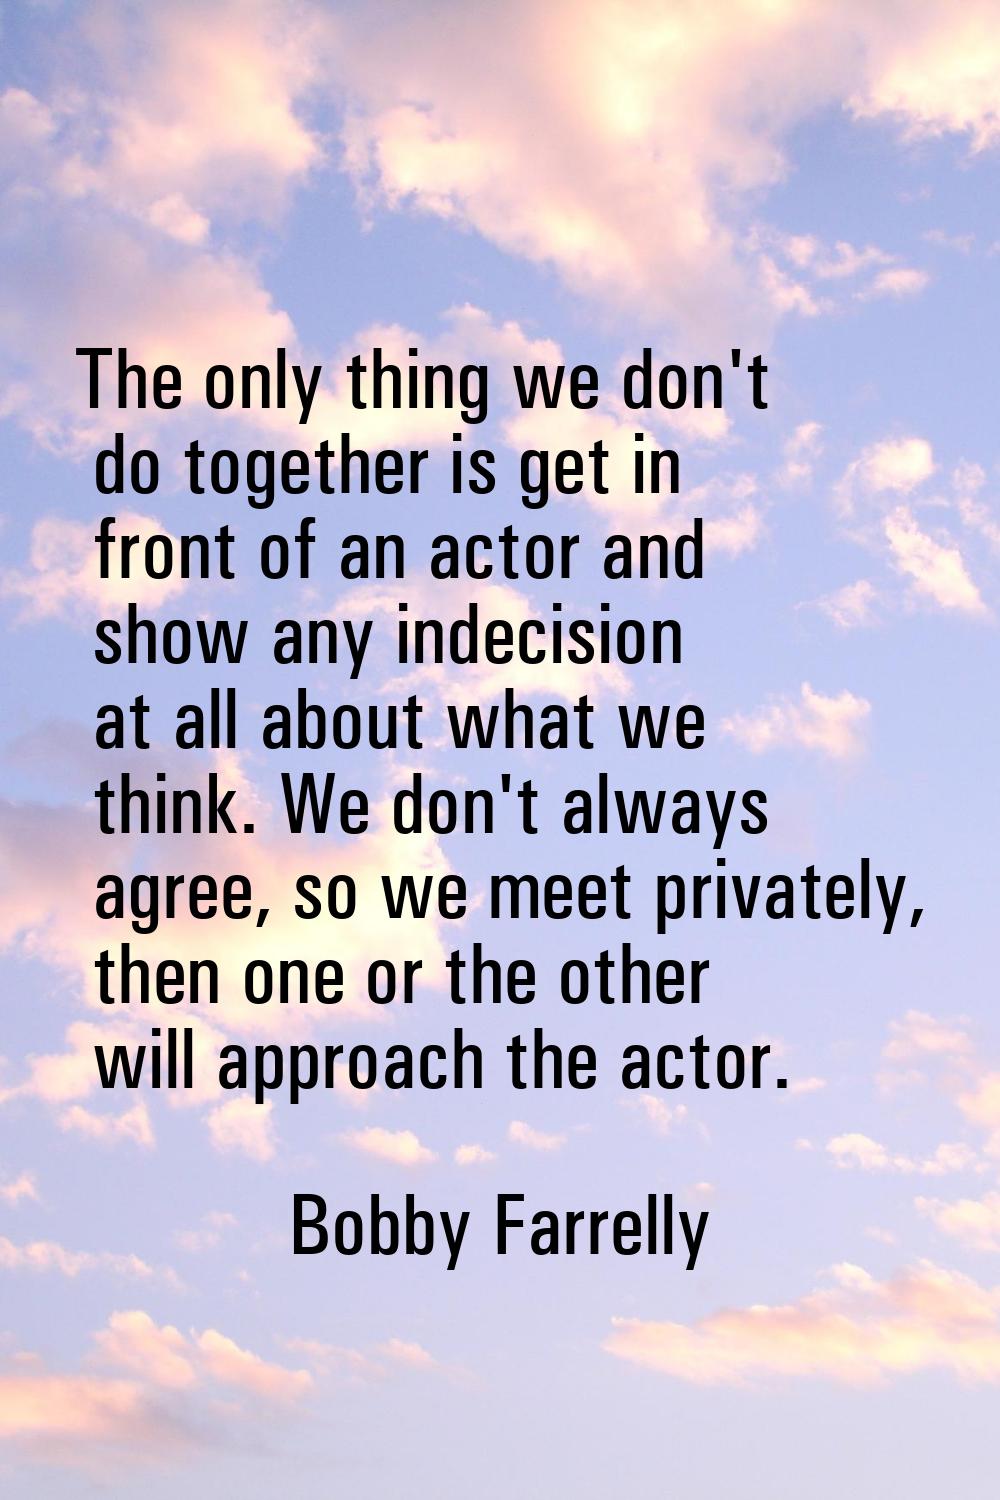 The only thing we don't do together is get in front of an actor and show any indecision at all abou